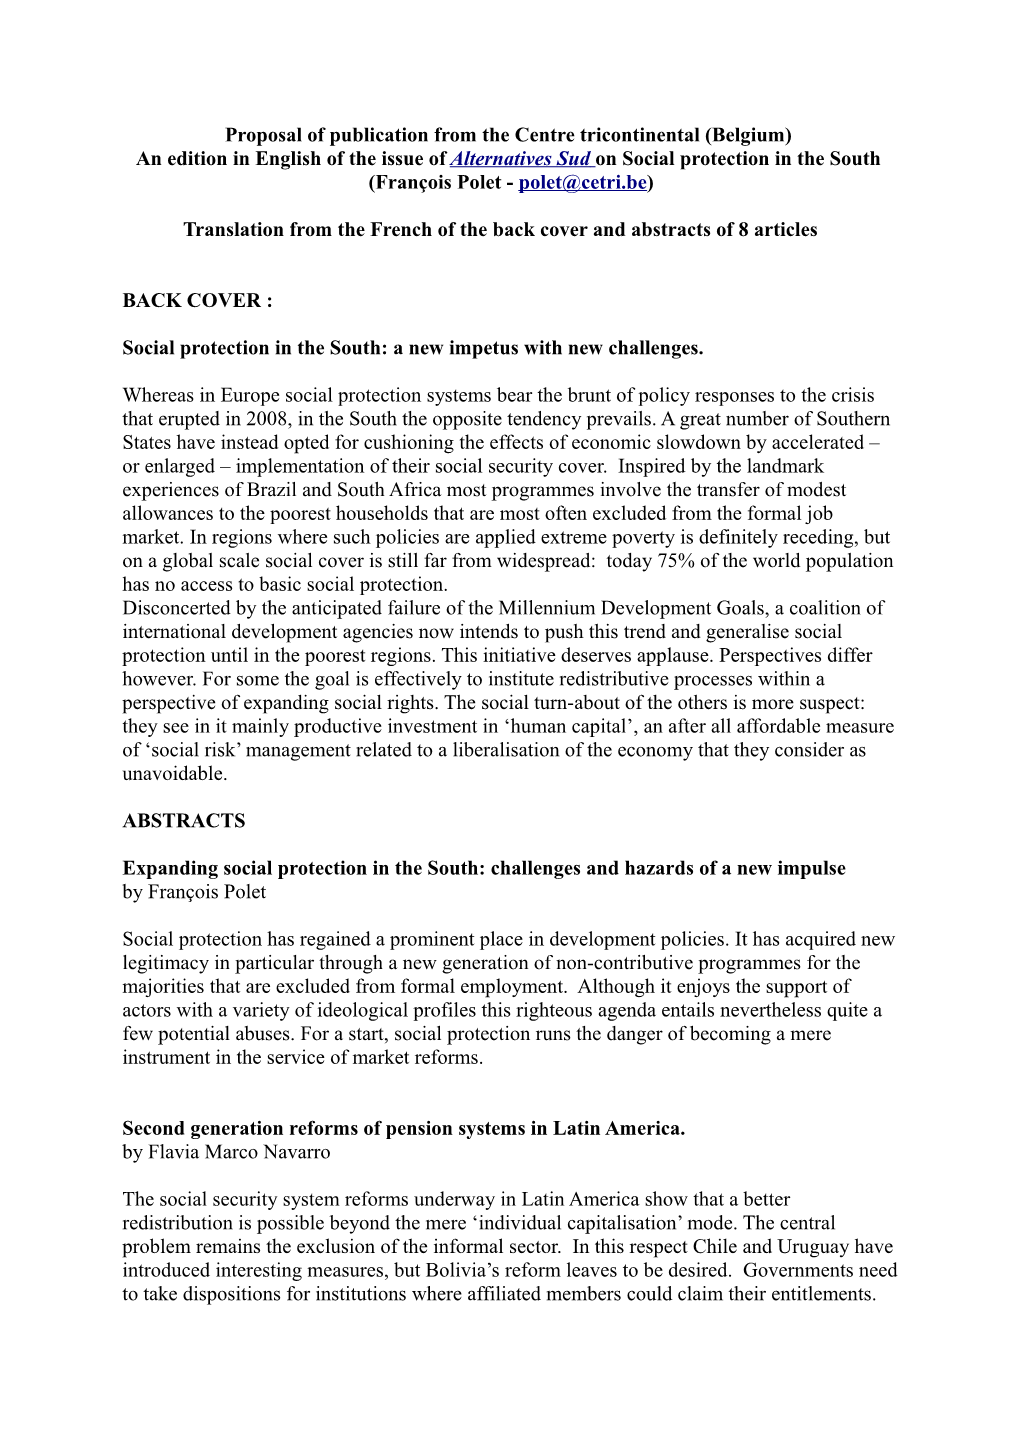 Proposal of Publication from the Centre Tricontinental (Belgium)